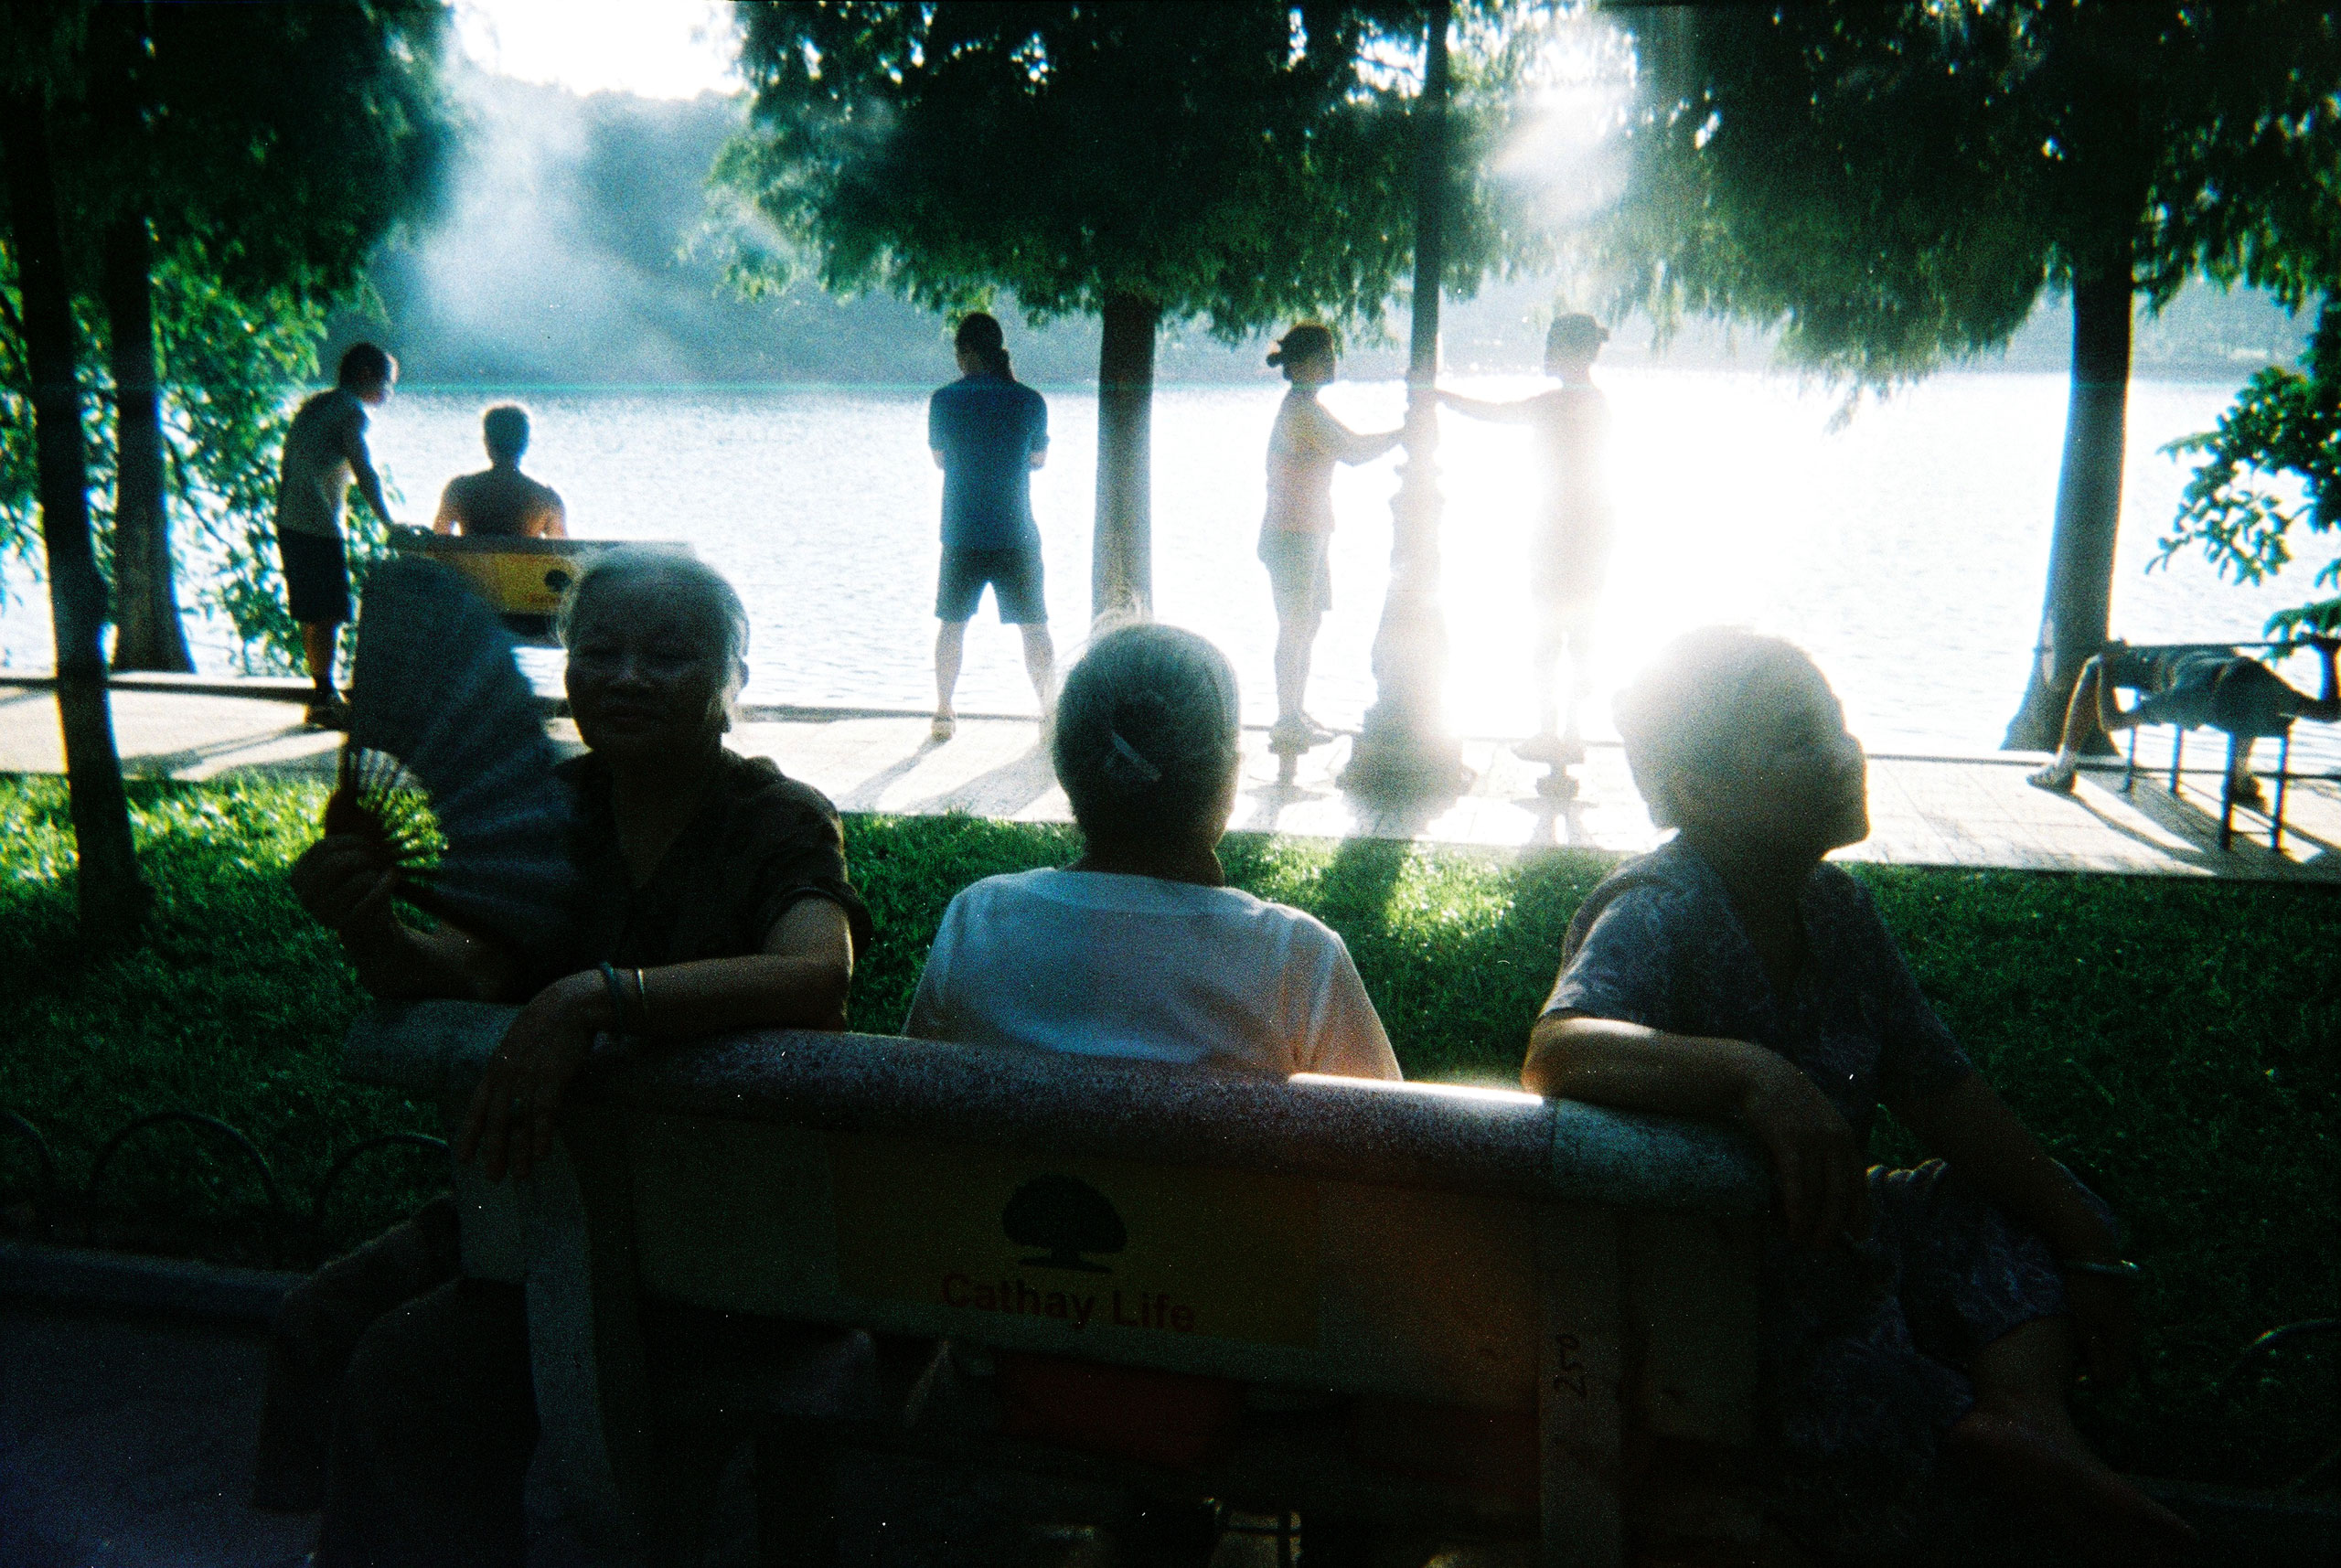 People gather to exercise in an early morning at Hoan Kiem Lake, Hanoi, August, 2011.